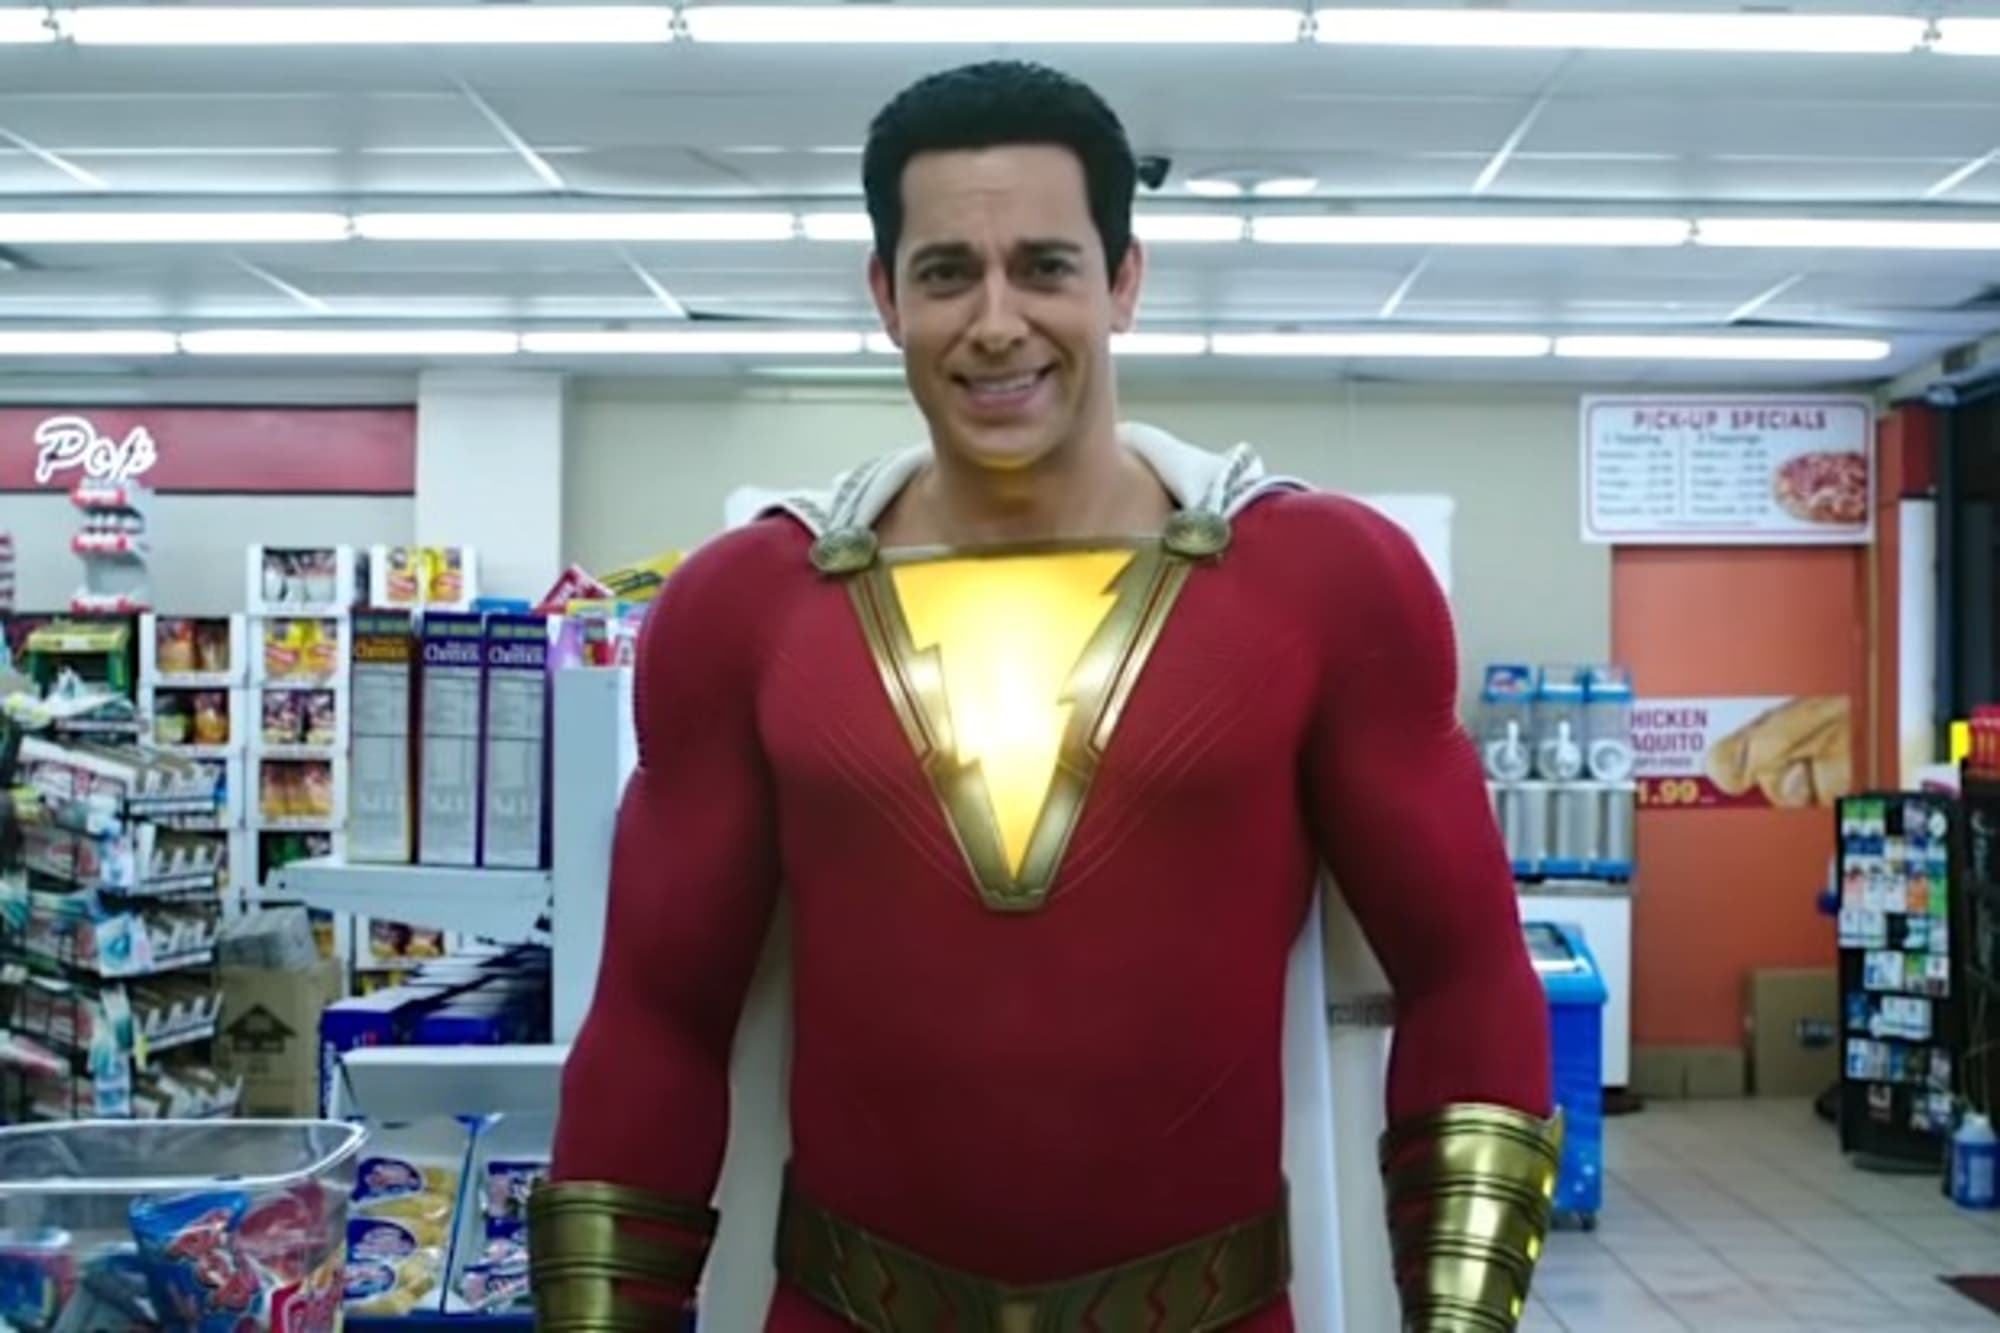 Box office analysis: Did Shazam! come out at the wrong time?